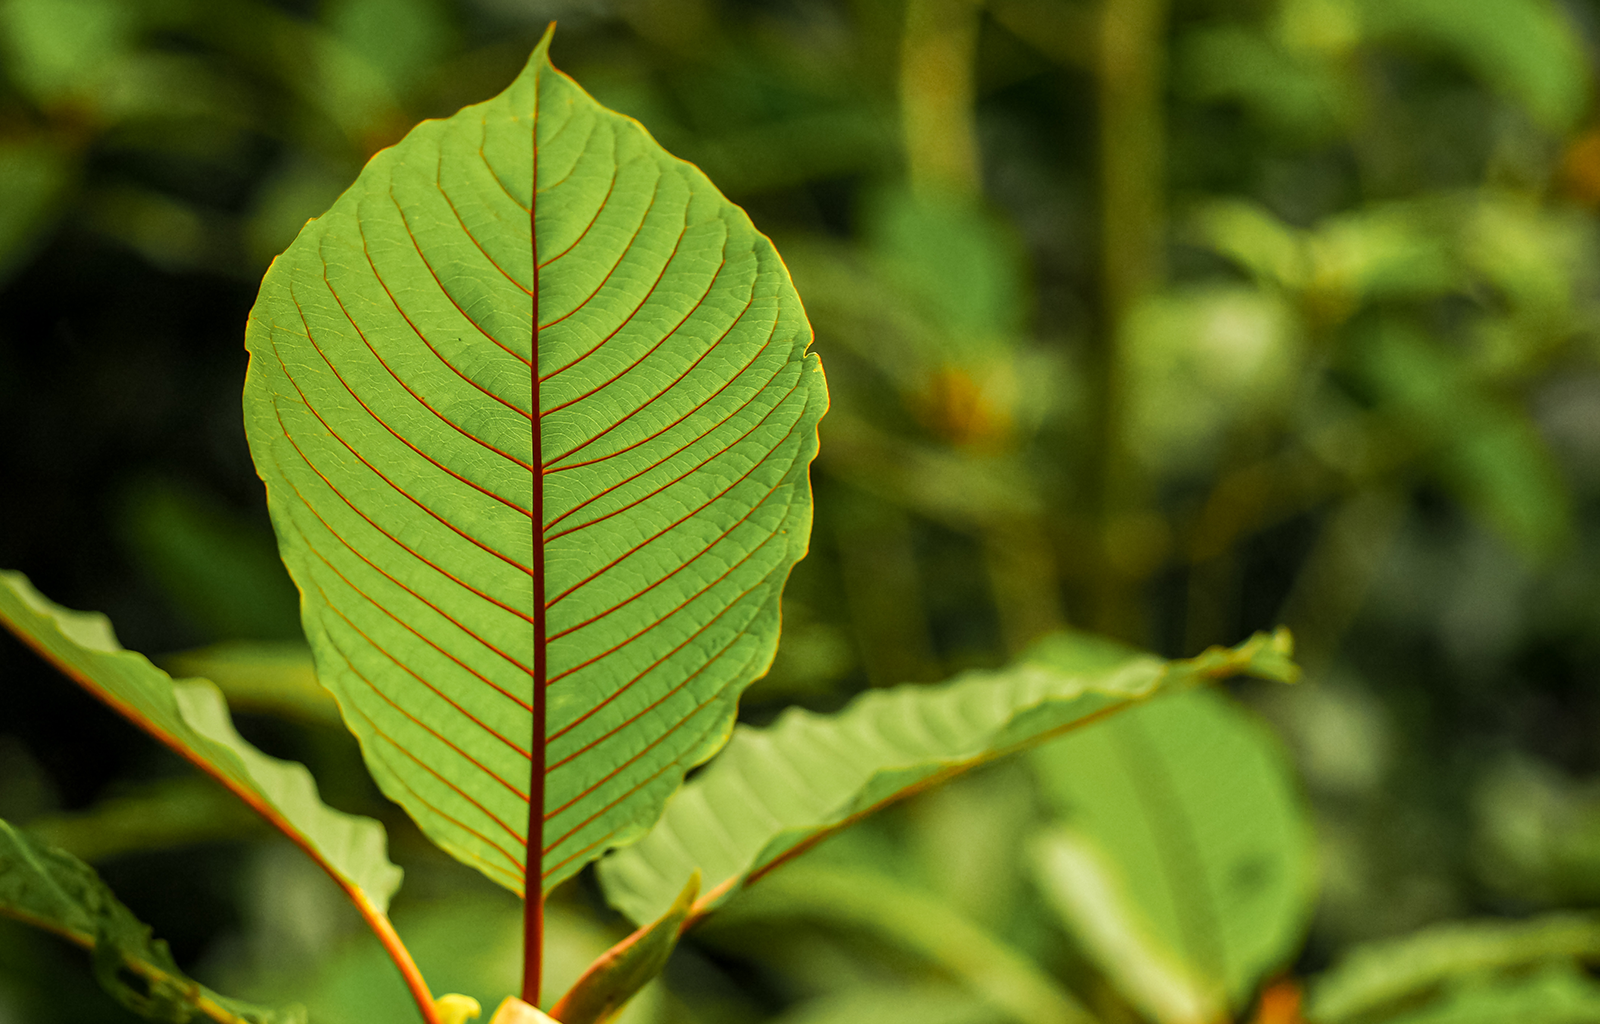 Featured image depicting a red veined borneo kratom leaf, set among a tropical rain forest.